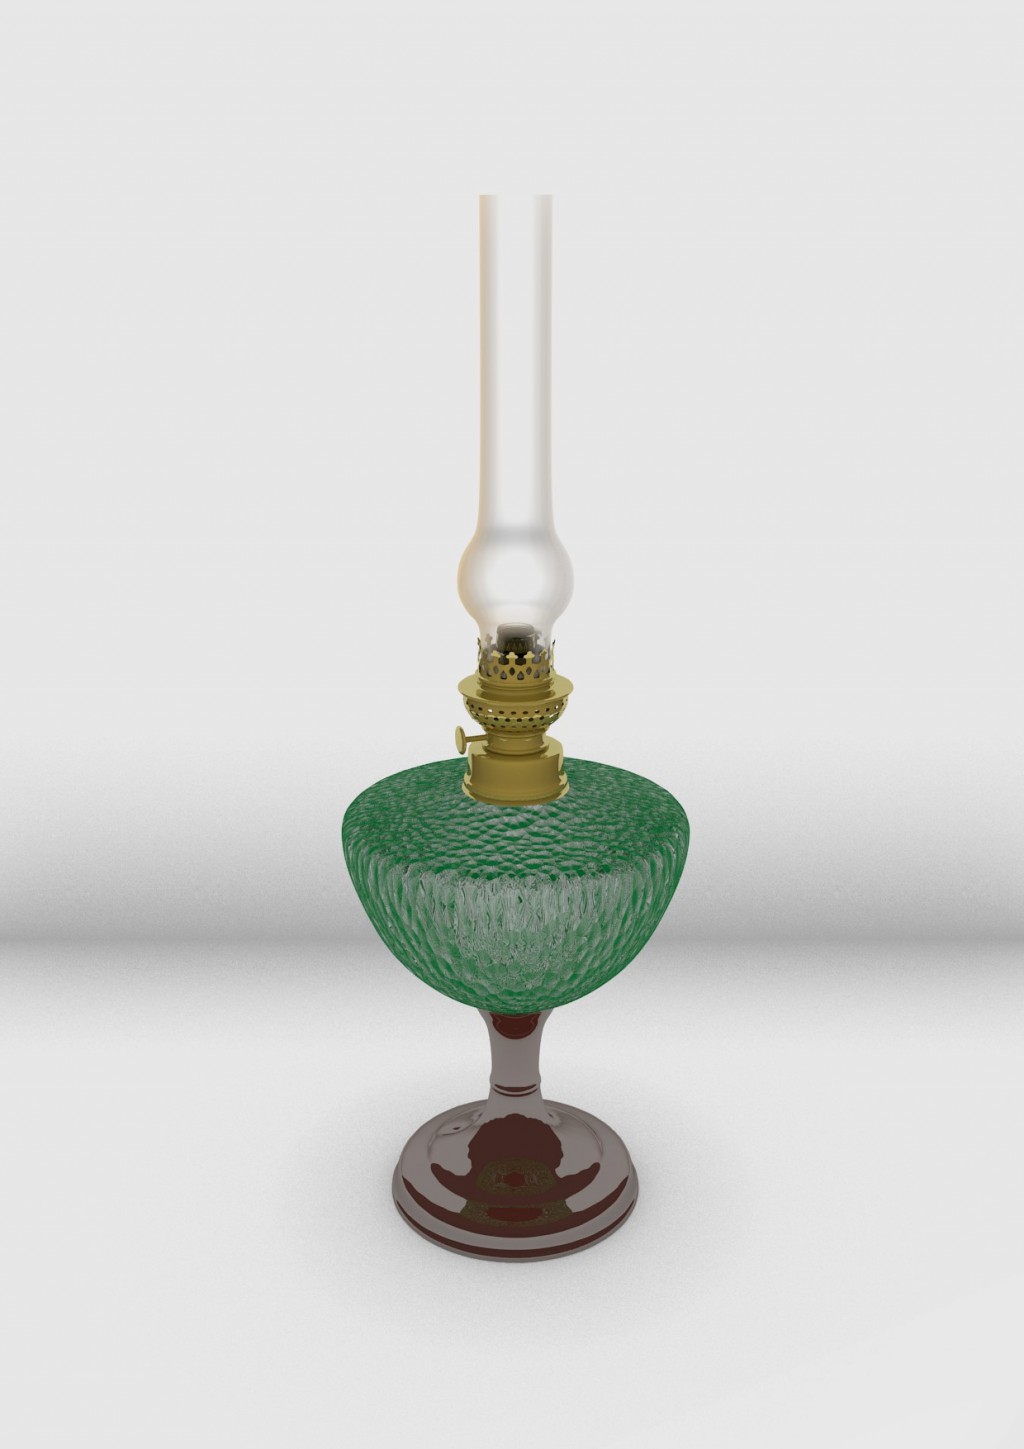 Lamp has oil preview image 1